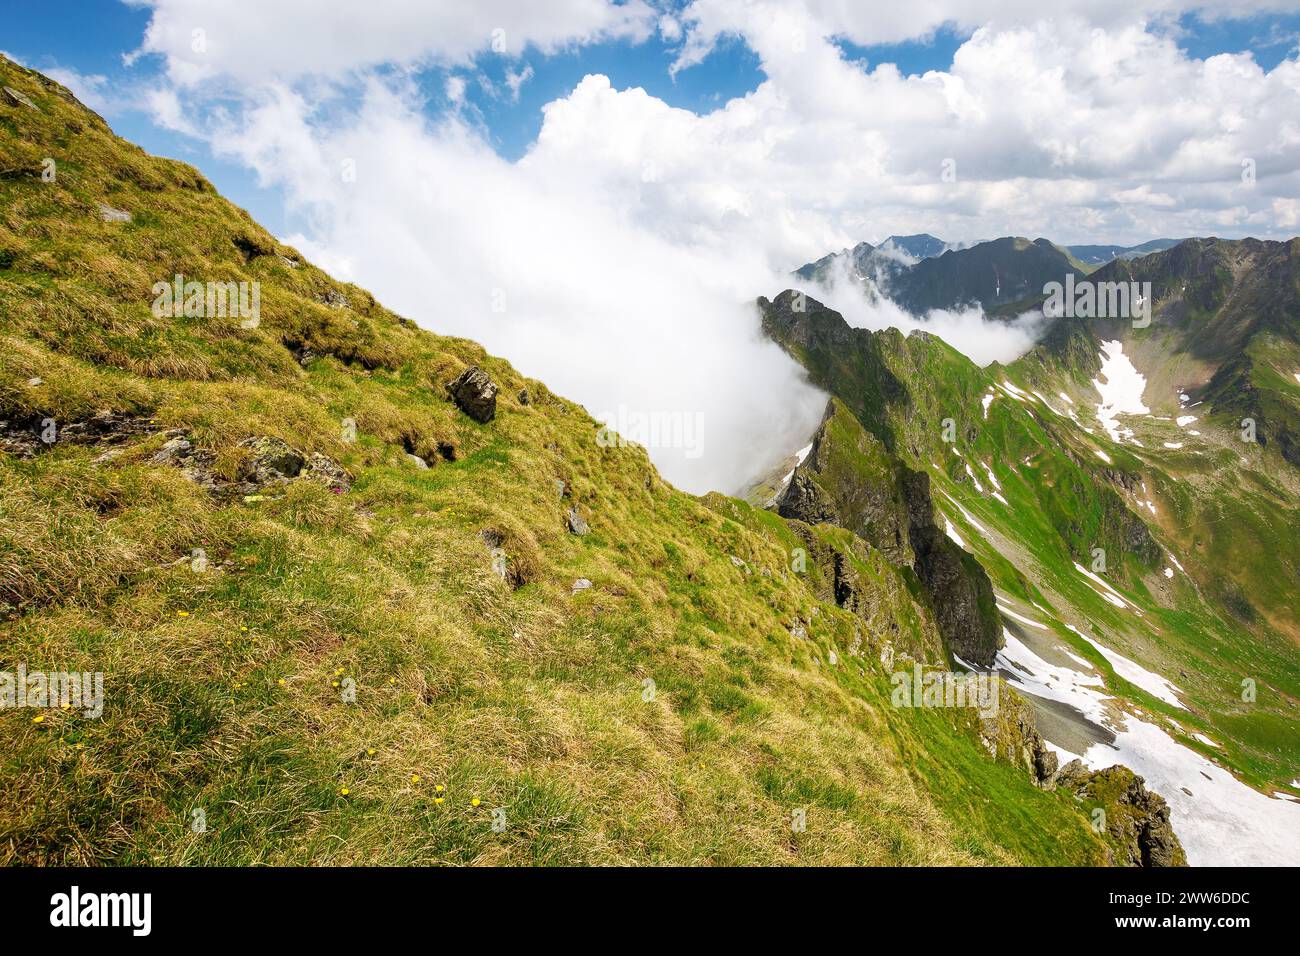 landscape of transylvania alps in summer. spots of snow among grass on the rocky slopes of fagaras range beneath a sky with clouds. popular travel des Stock Photo